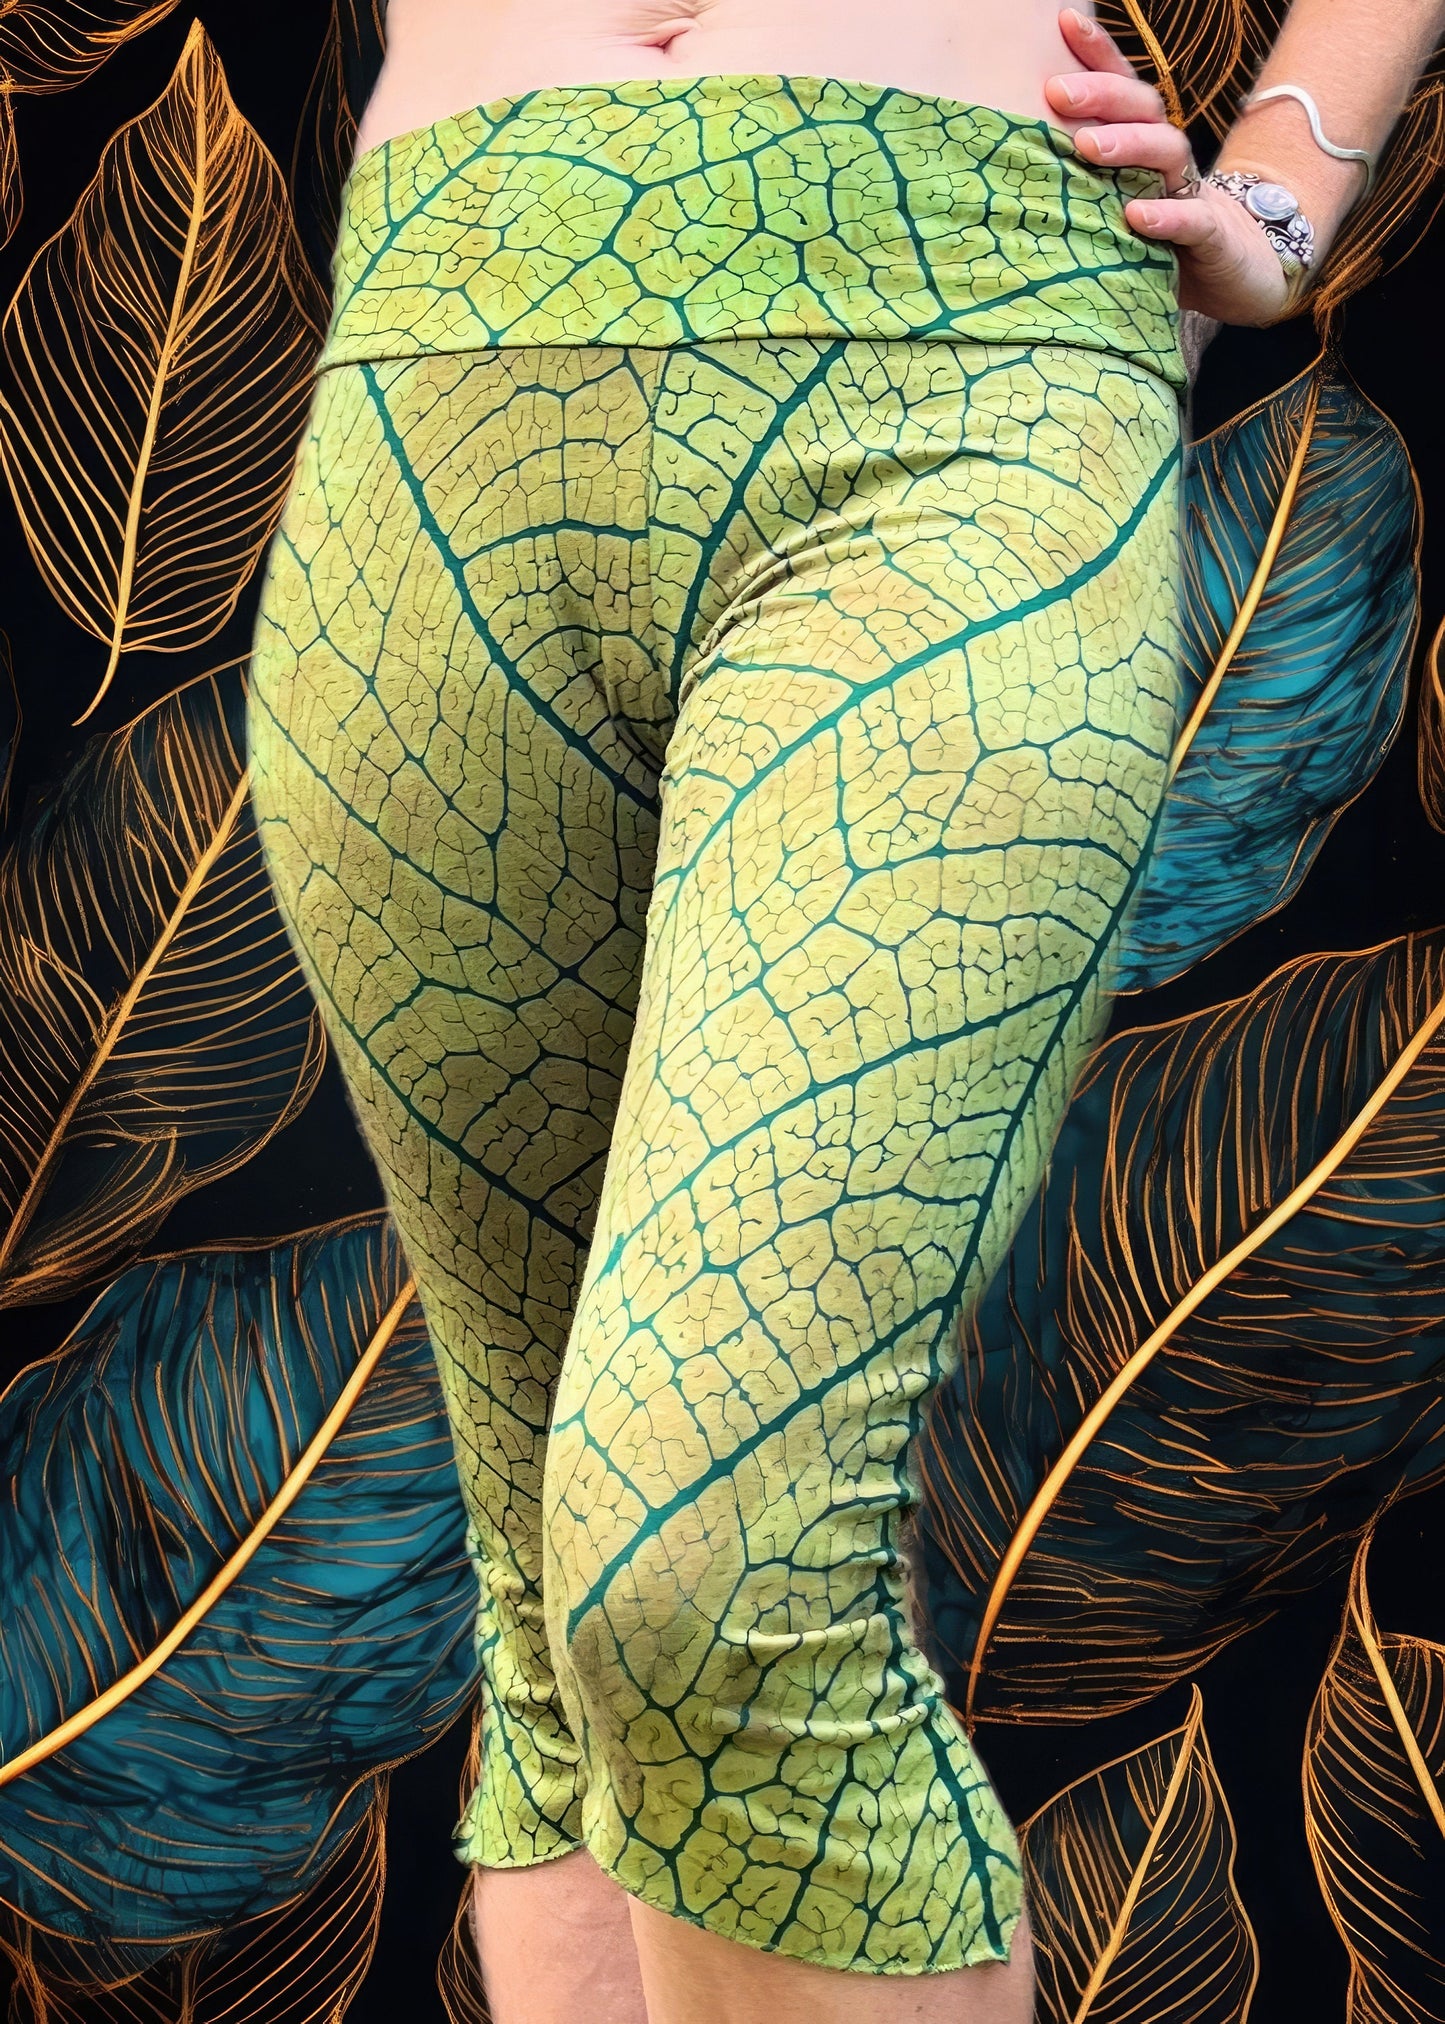 Handmade 3/4 Length Leafy Leggings - tights - organic cotton - hand printed and stitched by me